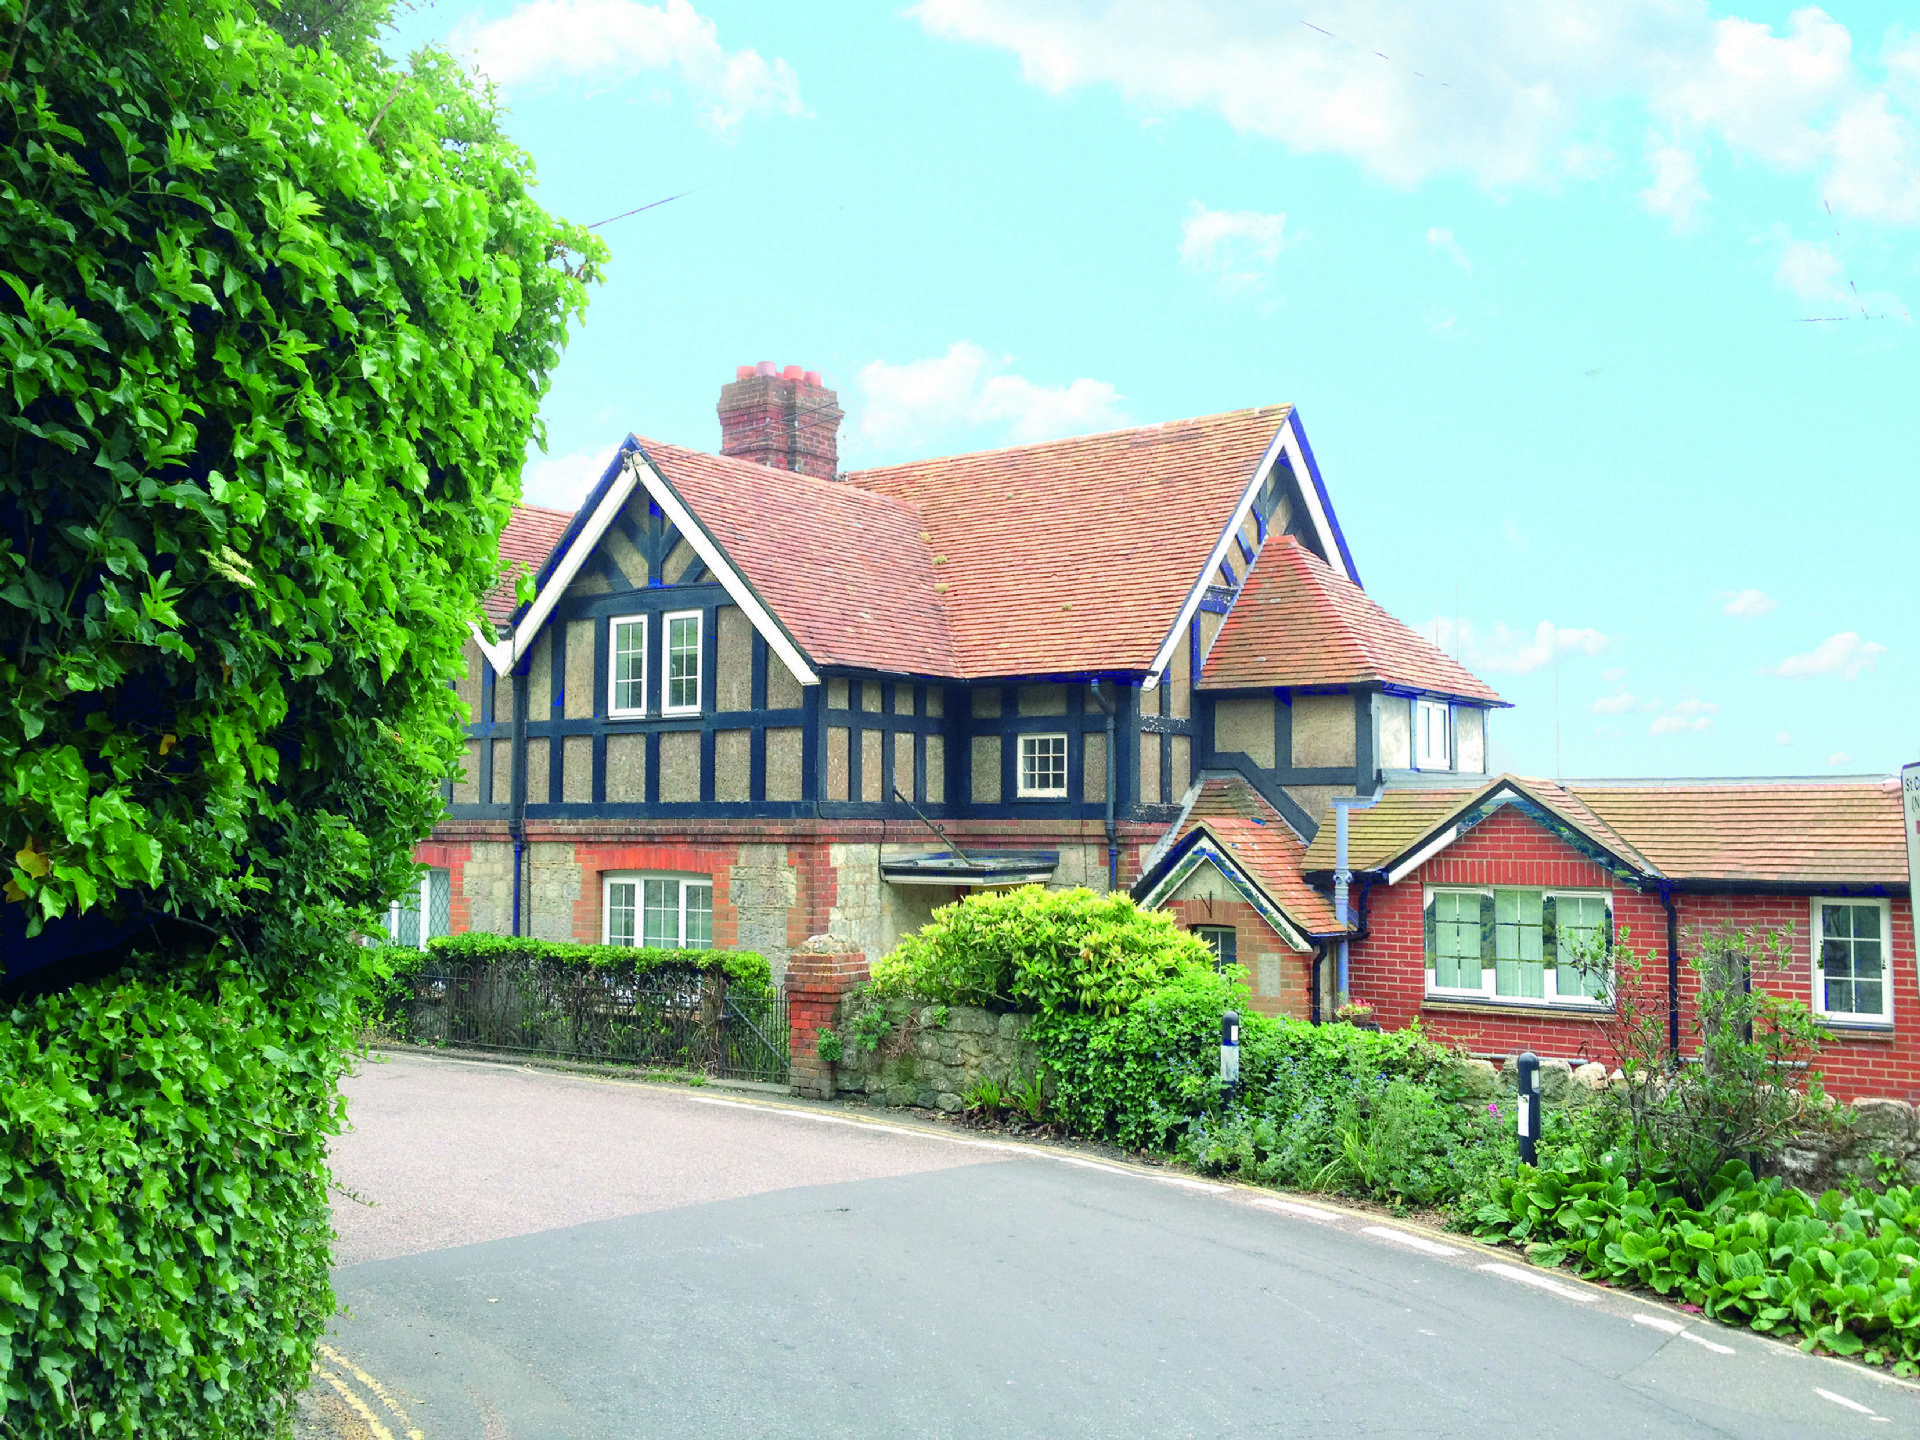 West Winnowing is located in Yarmouth and surrounding villages